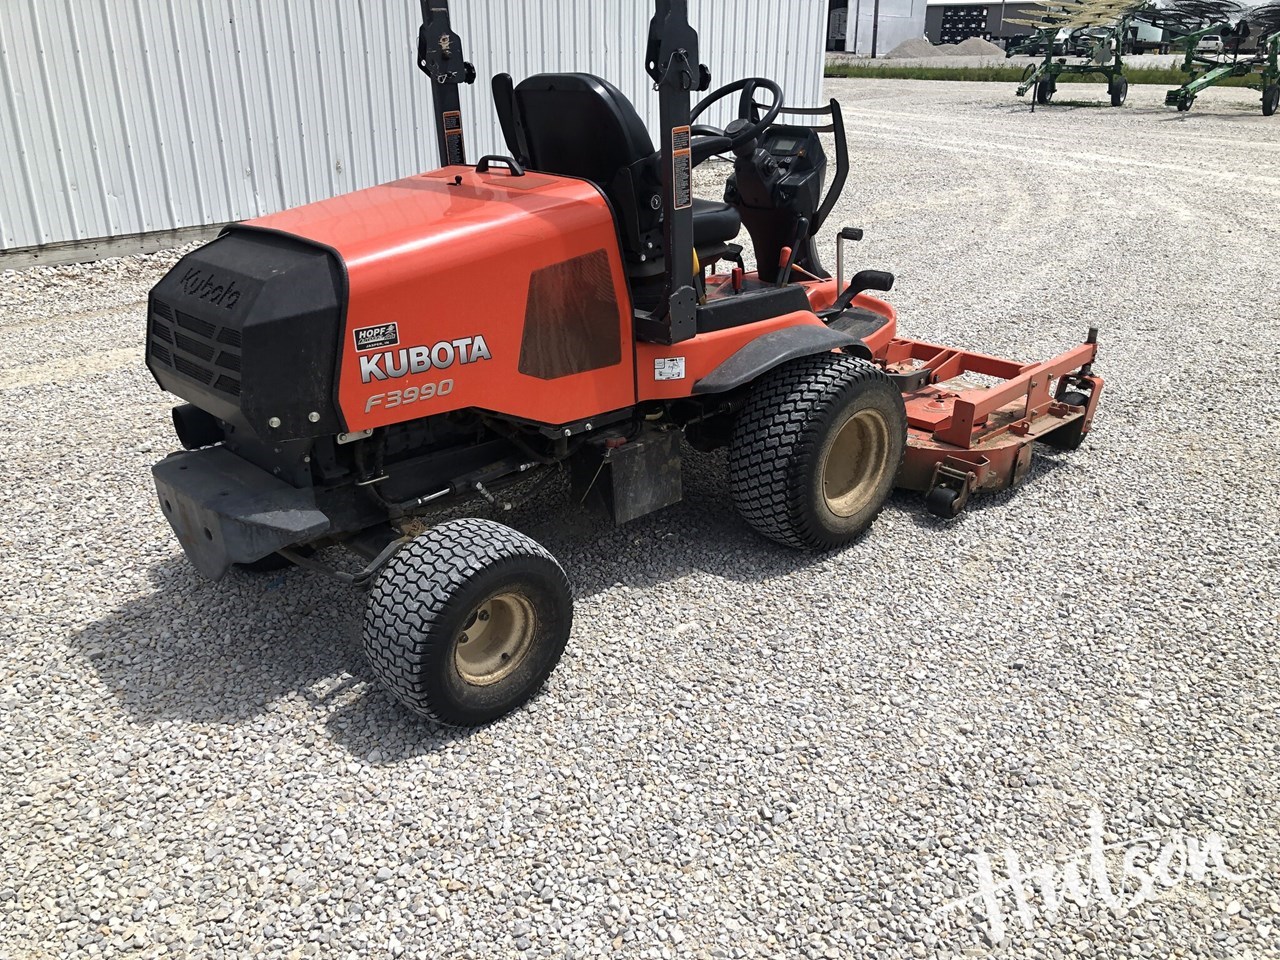 2016 Kubota F3990 Commercial Front Mowers For Sale In Jasper Indiana